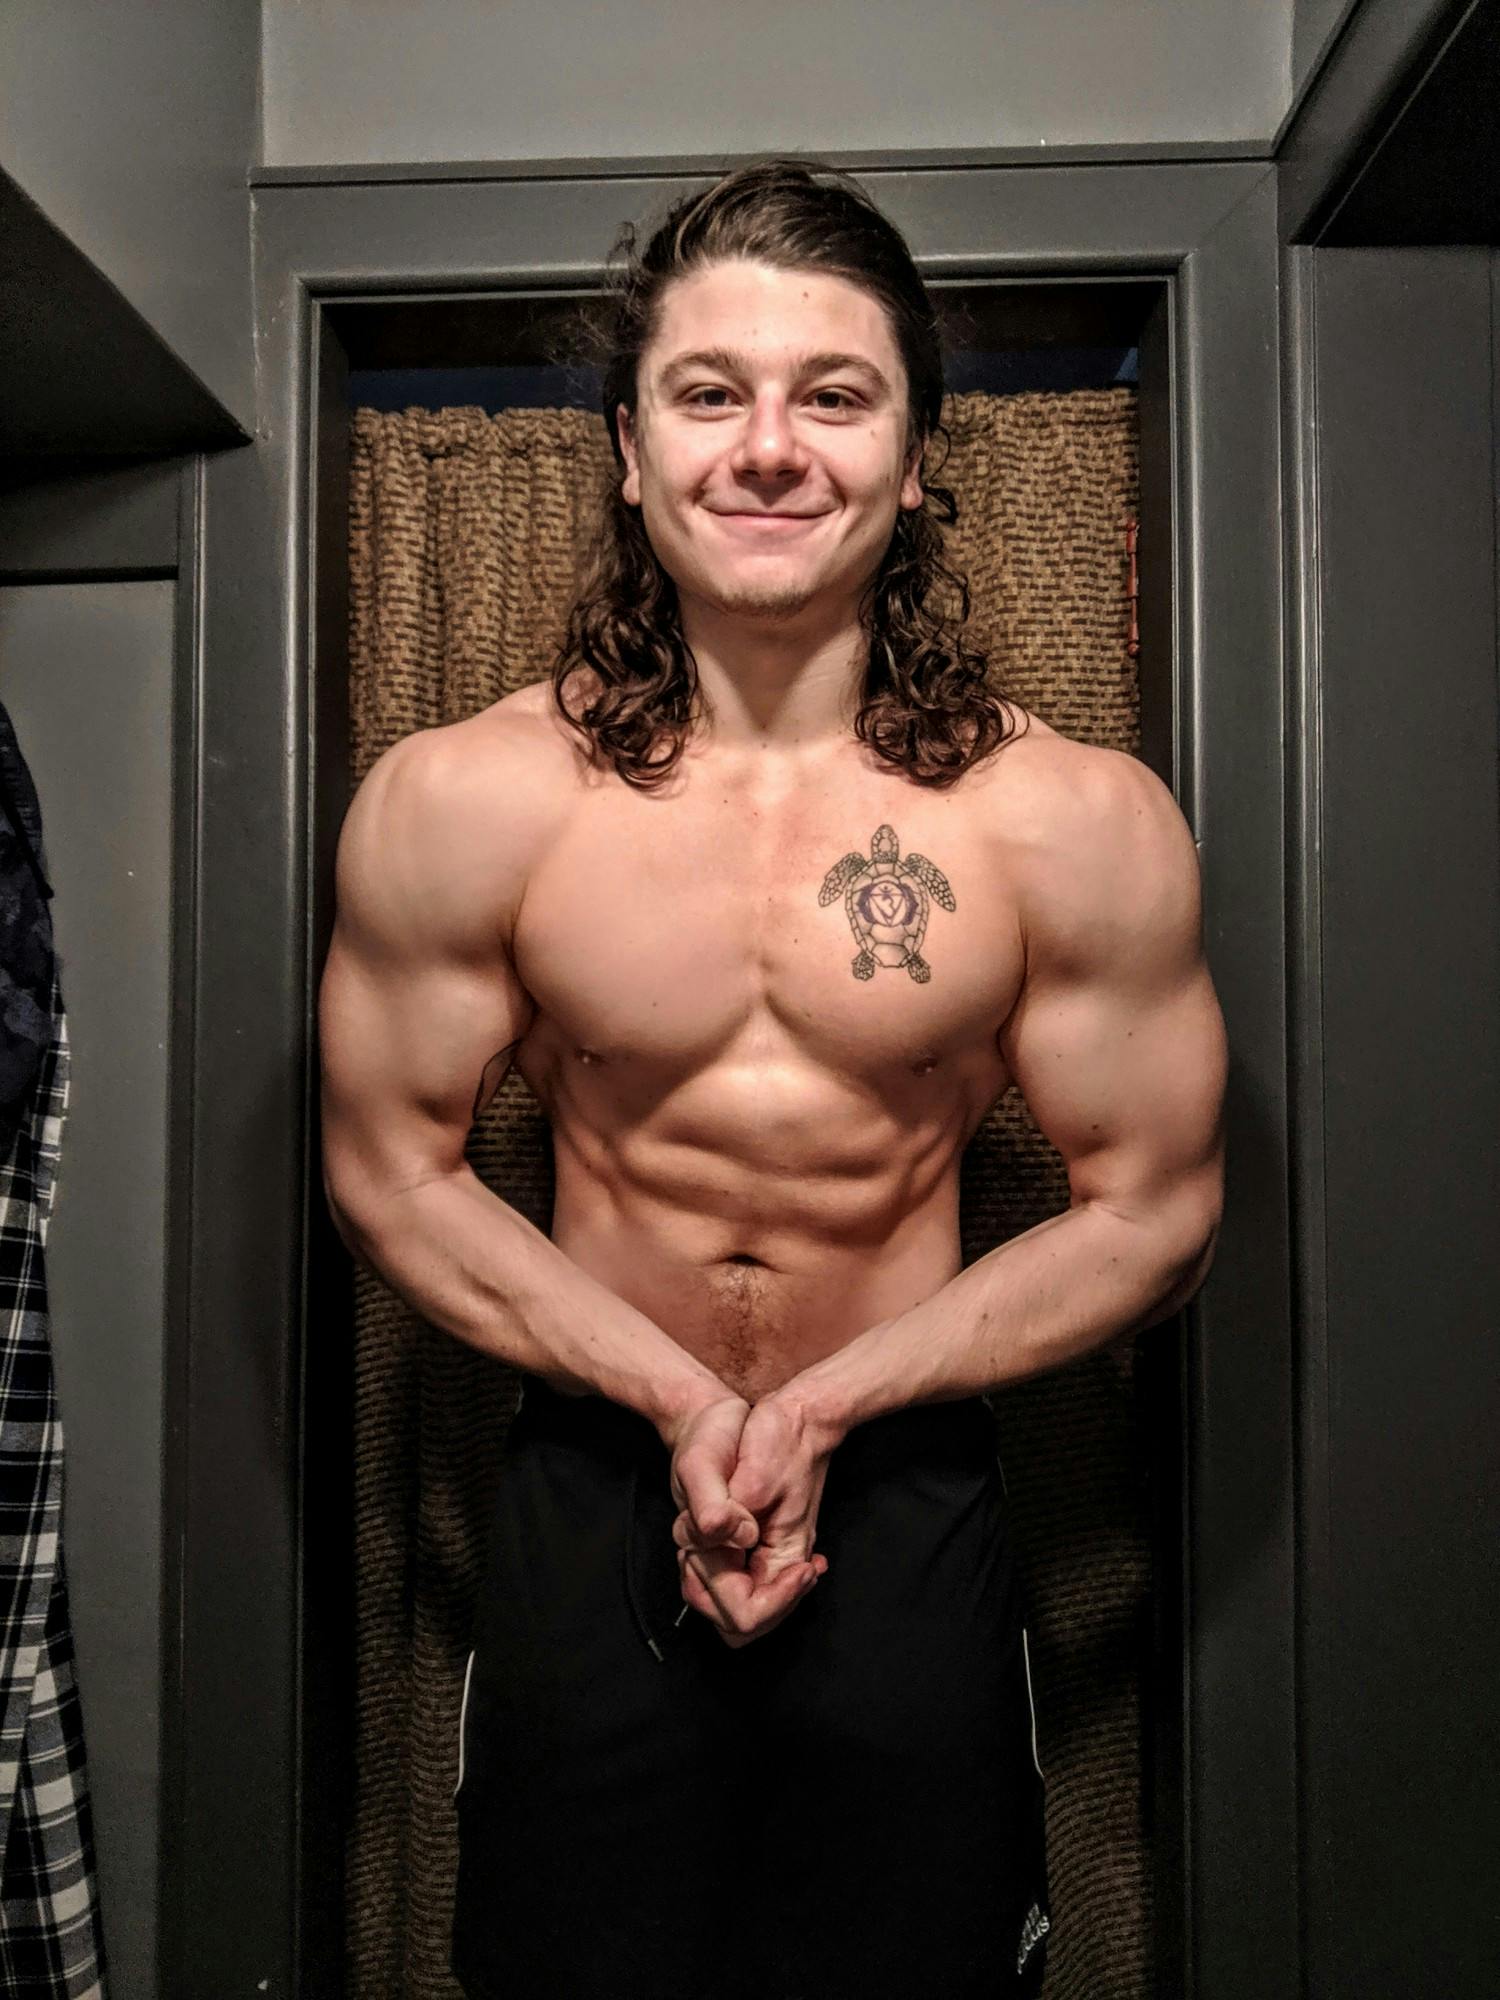 Cole Hastings, a UB alumni, has established a personal training service through individual coaching, plant-based meal plans and personalized workout routines.